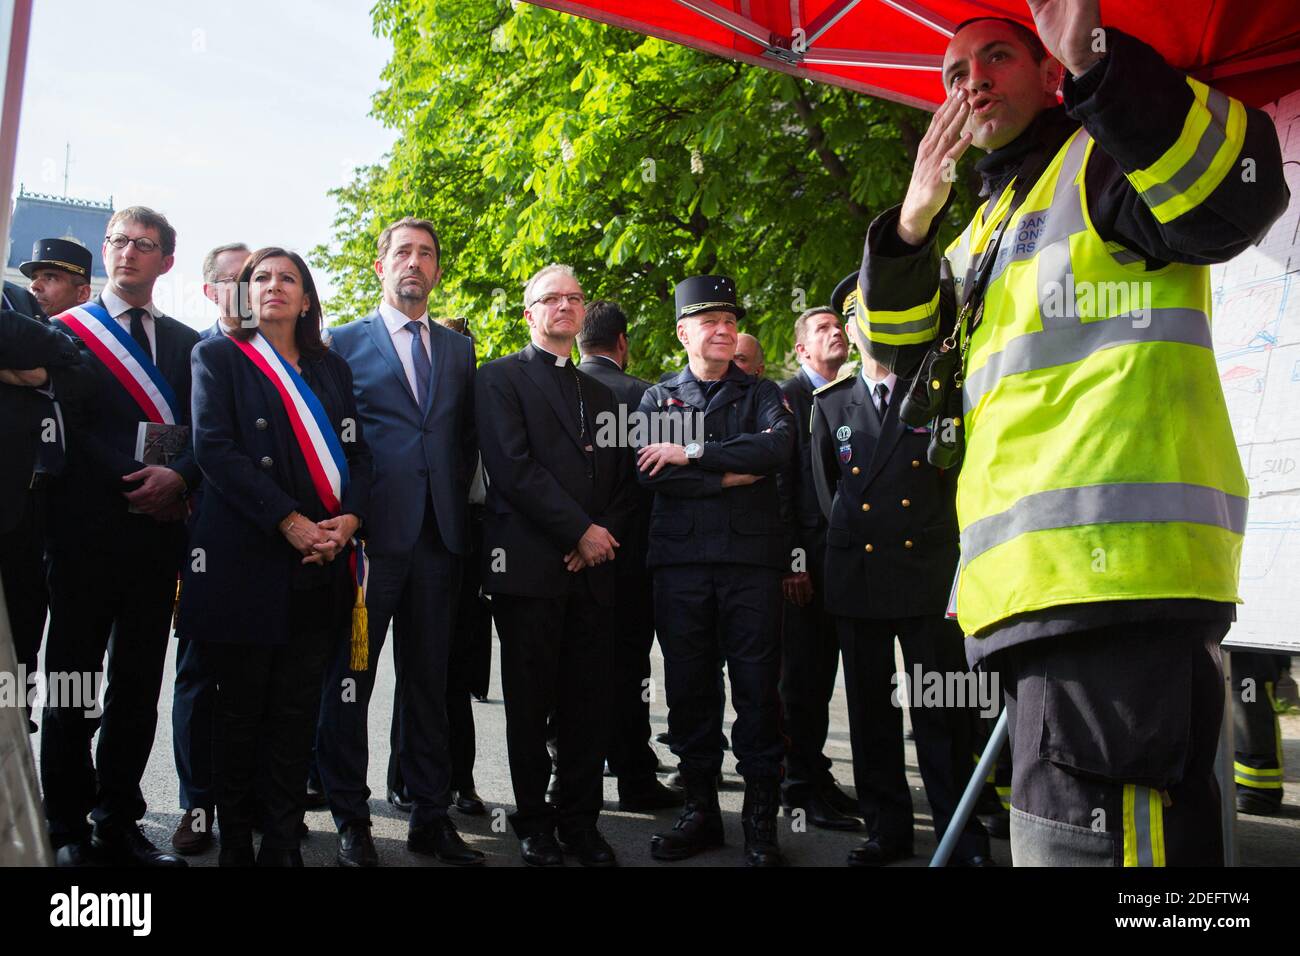 Jean-Claude Gallet General of the fire fighters of paris, Jean-Marc Chauve, French Interior Minister Christophe Castaner, Paris prefect Didier Lallement, Paris mayor Anne Hidalgo, and other officials walk by Notre Dame cathedral on April 18, 2019 in Paris. France paid a daylong tribute on April 18, 2019 to the Paris firefighters who saved Notre Dame Cathedral from collapse, while construction workers rushed to secure an area above one of the church's famed rose-shaped windows and other vulnerable sections of the fire-damaged landmark. Photo by Raphael Lafargue/ABACAPRESS.COM Stock Photo